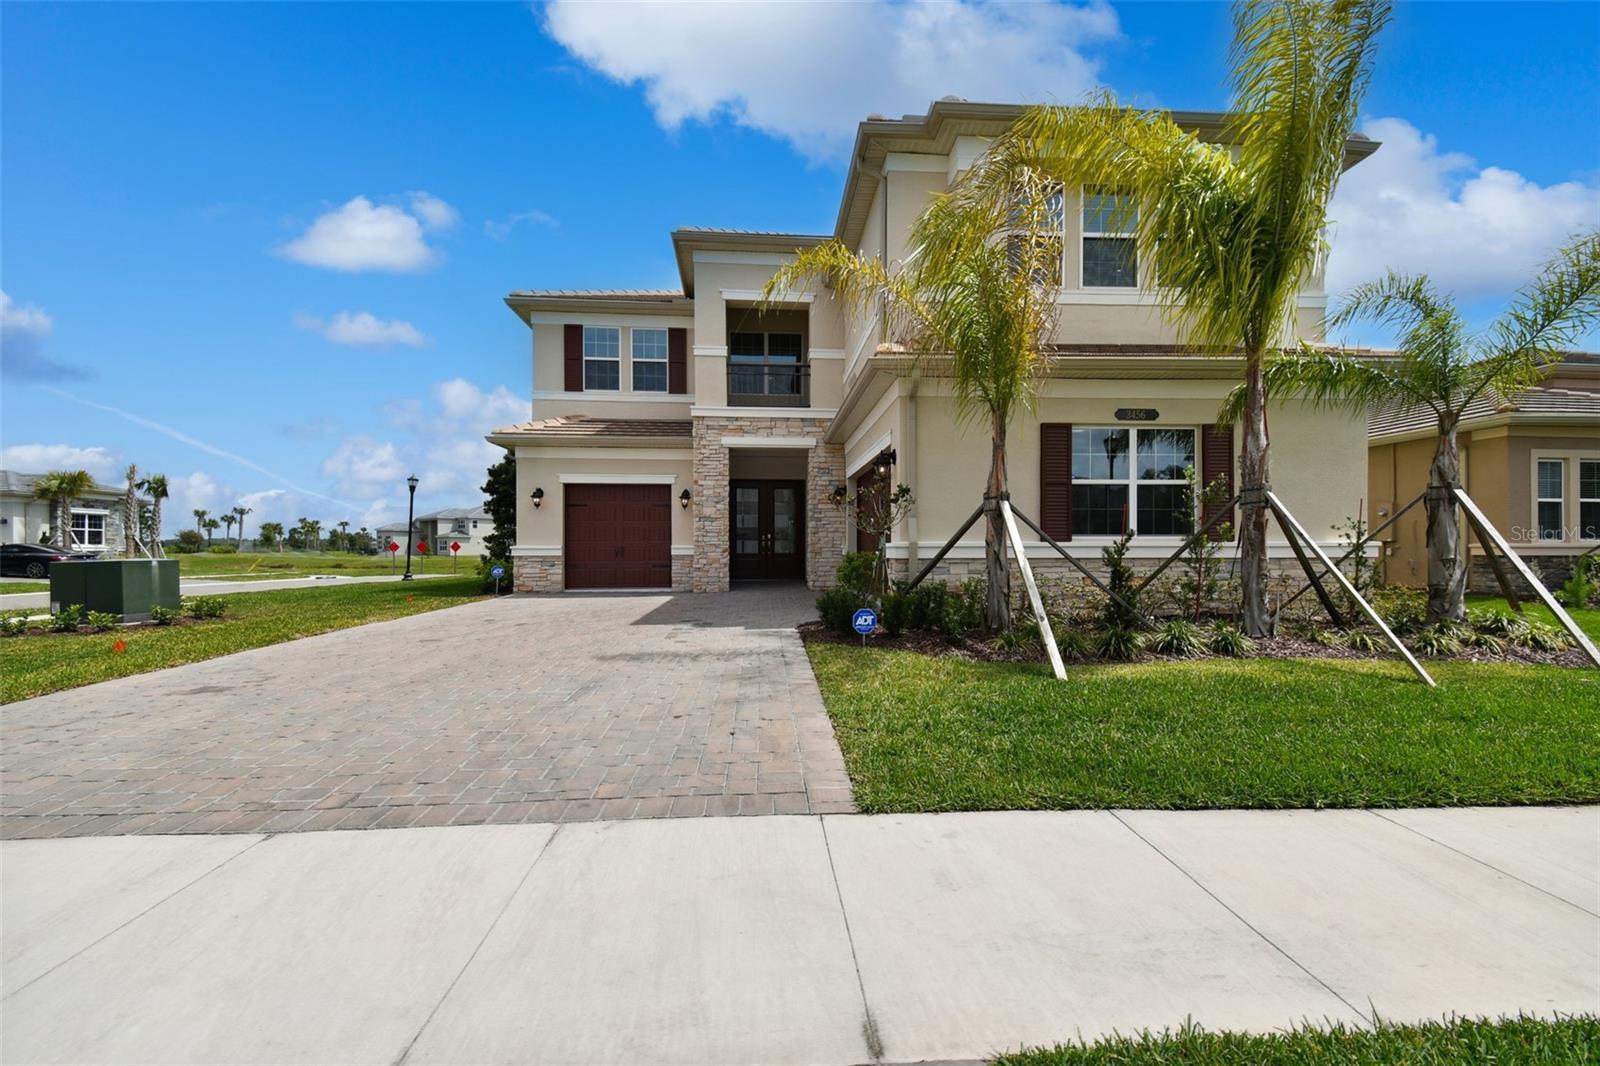 Photo one of 3456 Acacia Bay Ave Wesley Chapel FL 33543 | MLS T3516979